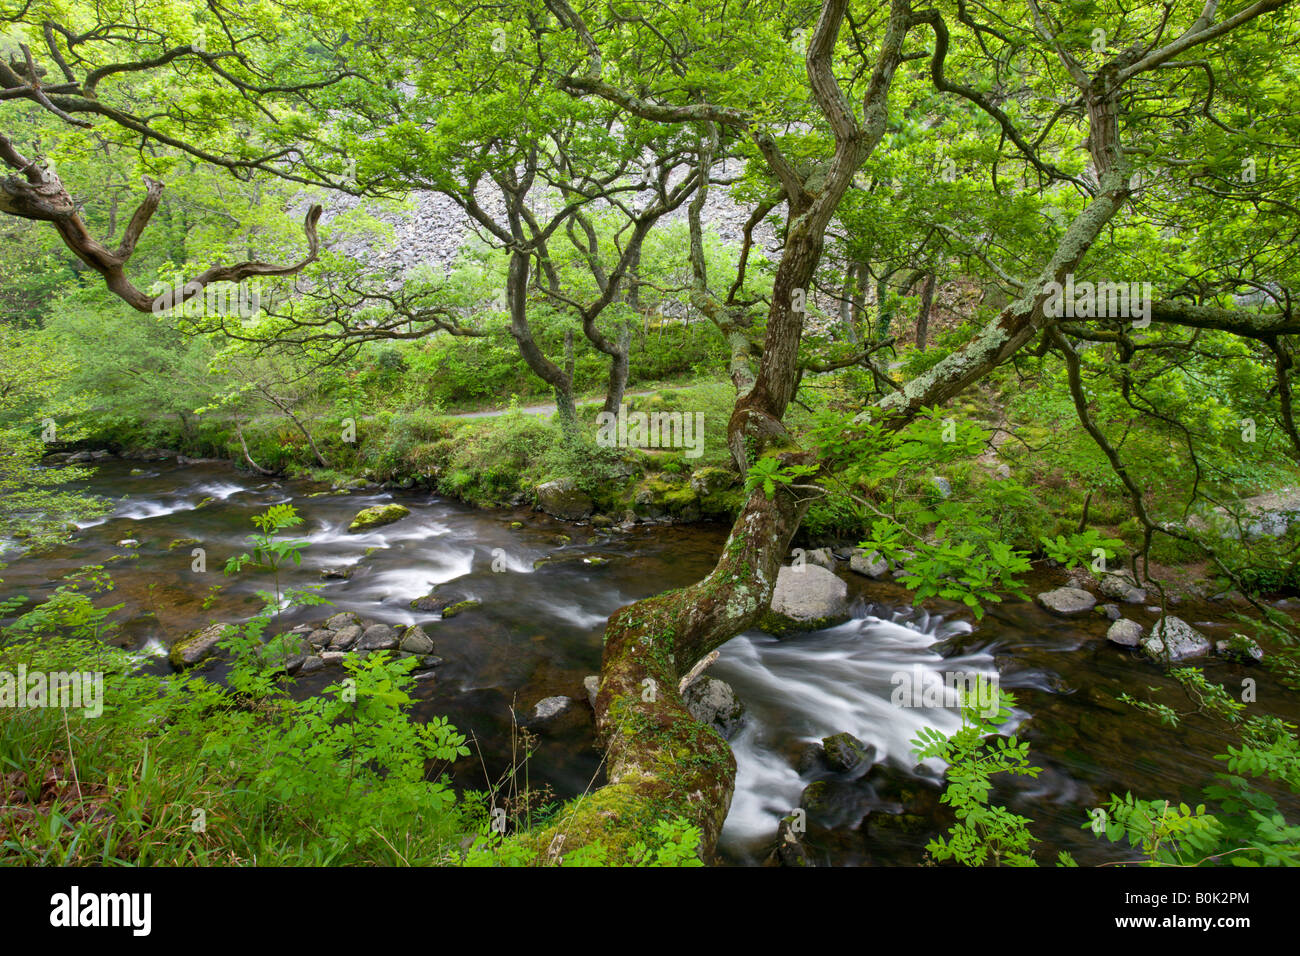 Spring brings a lush green canopy to Watersmeet in Exmoor National Park Devon England Stock Photo